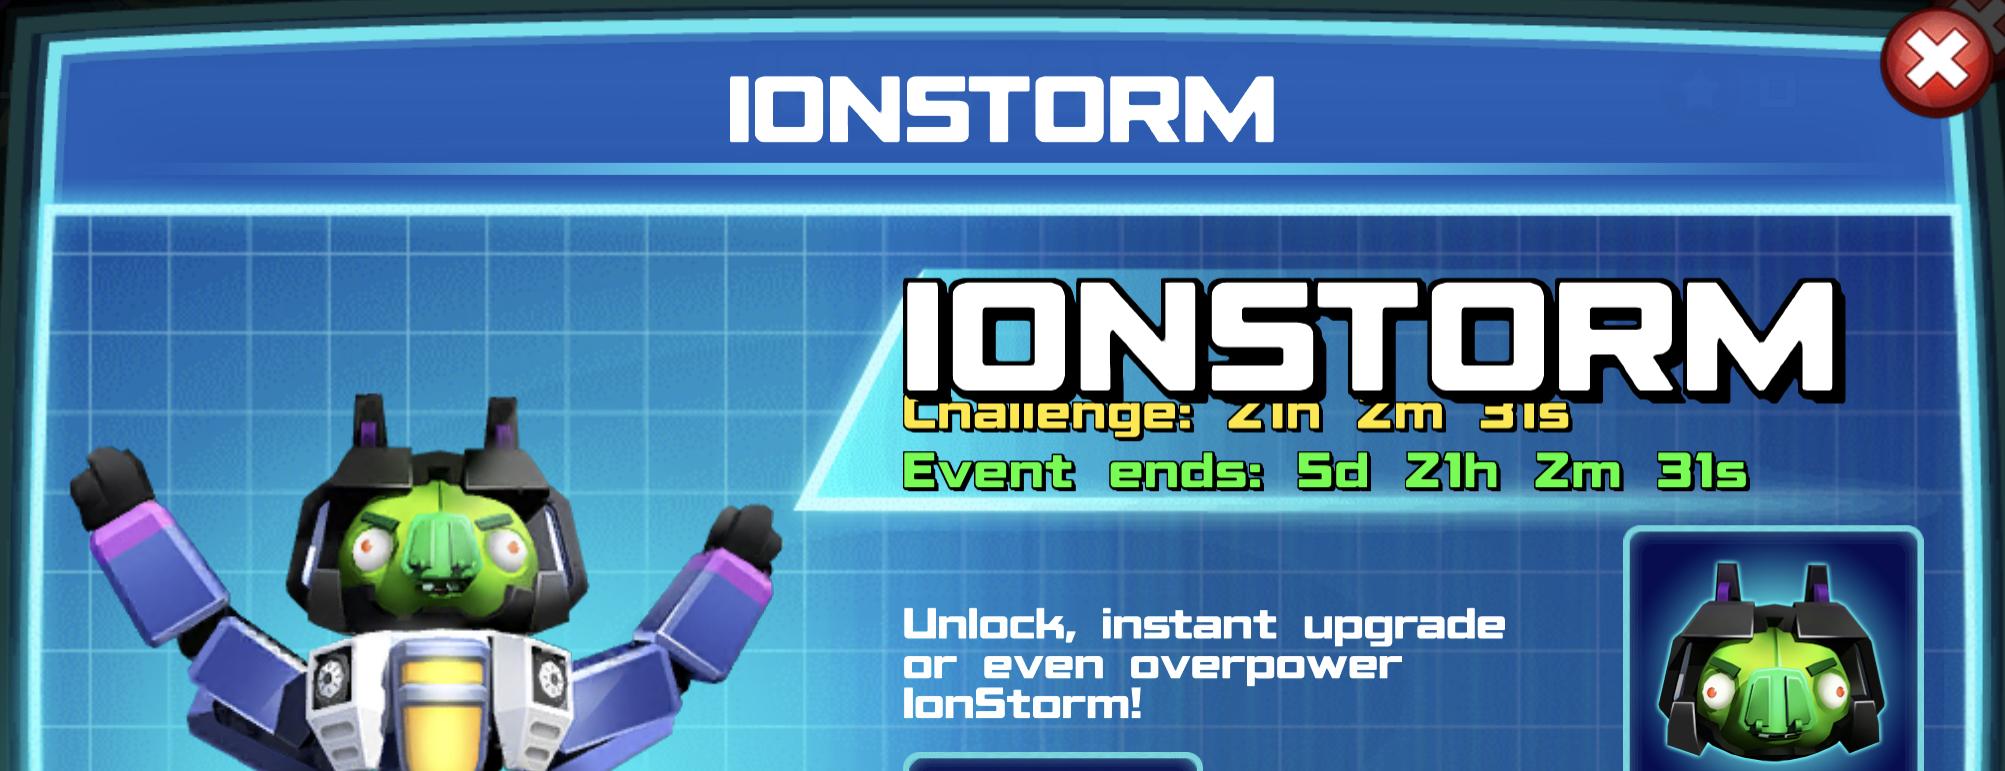 The event banner for Ionstorm